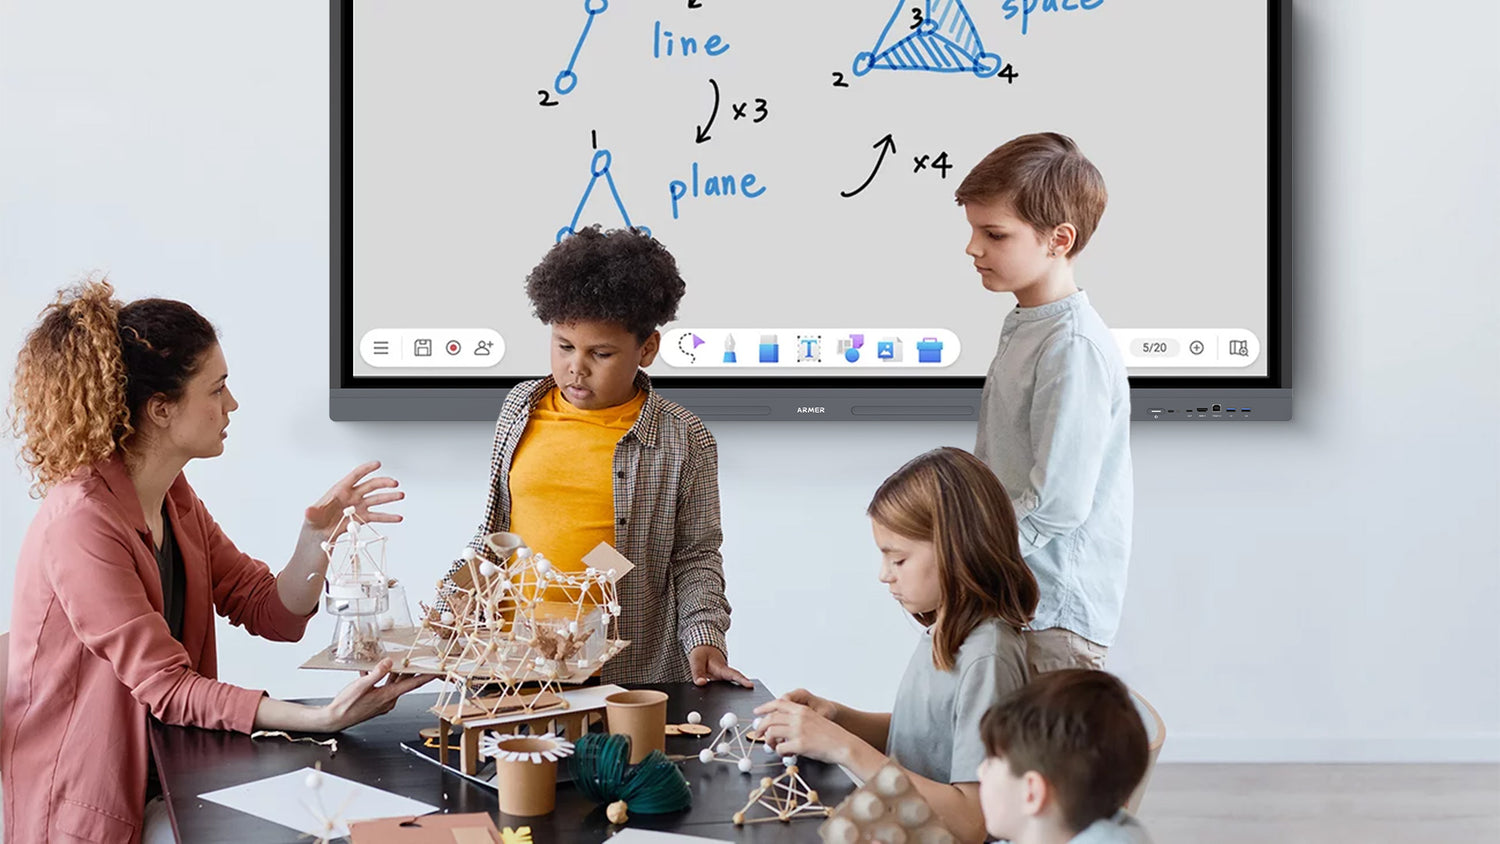 Answers to problems encountered when using Armer smart whiteboard